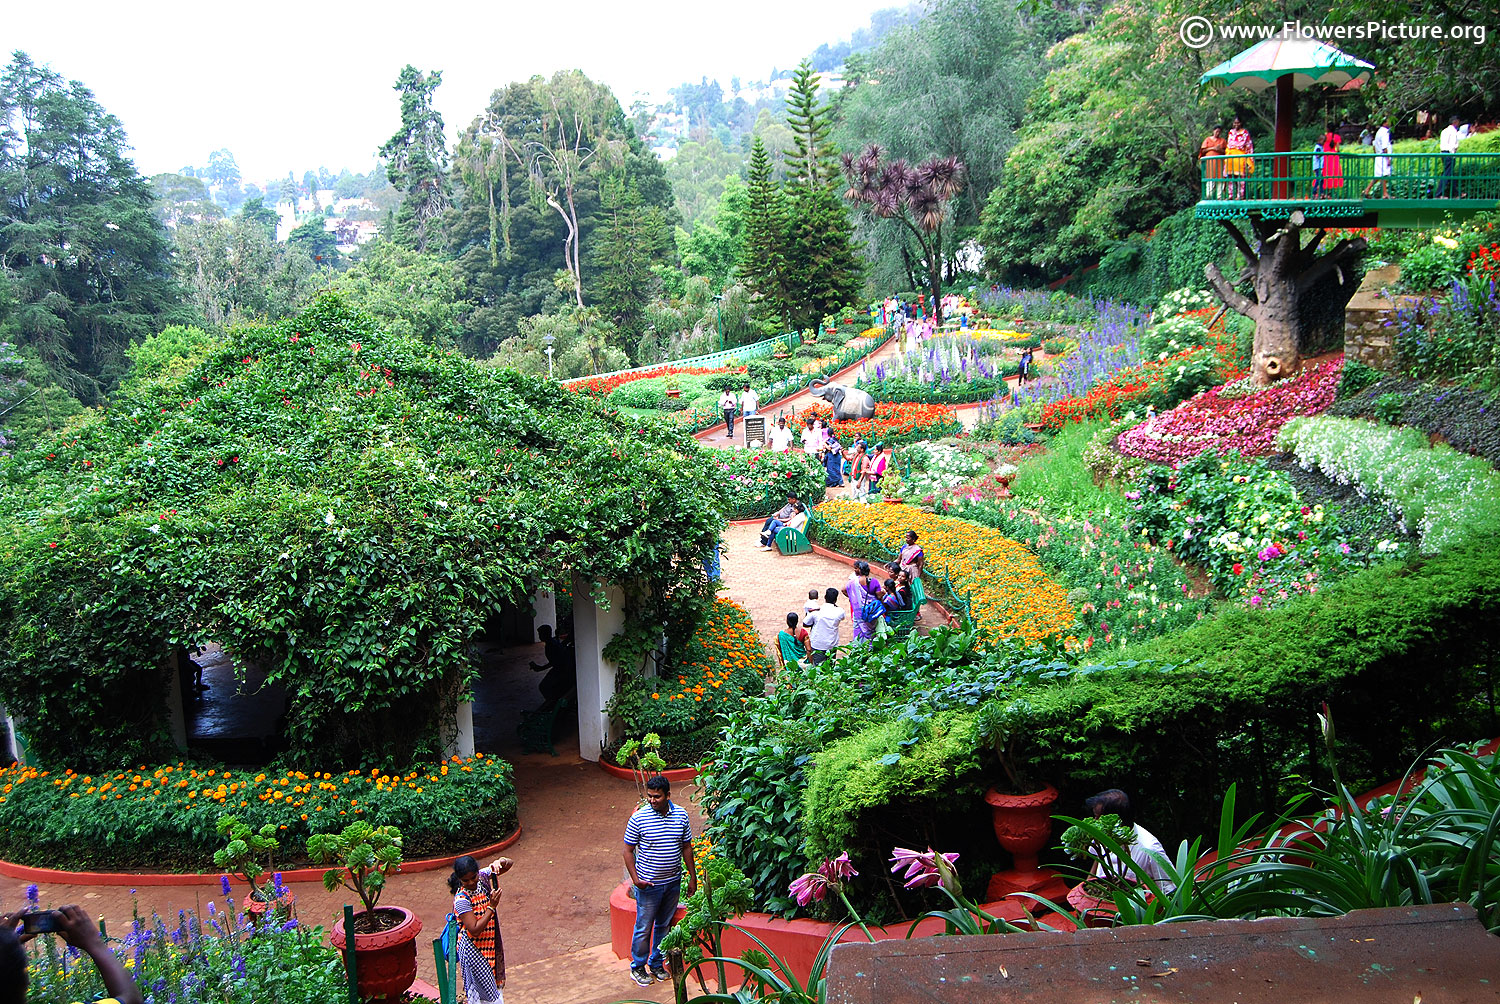 Government Botanical Garden Ooty - Ooty Government Botanical Garden (#1715731) - HD Wallpaper & Backgrounds Download